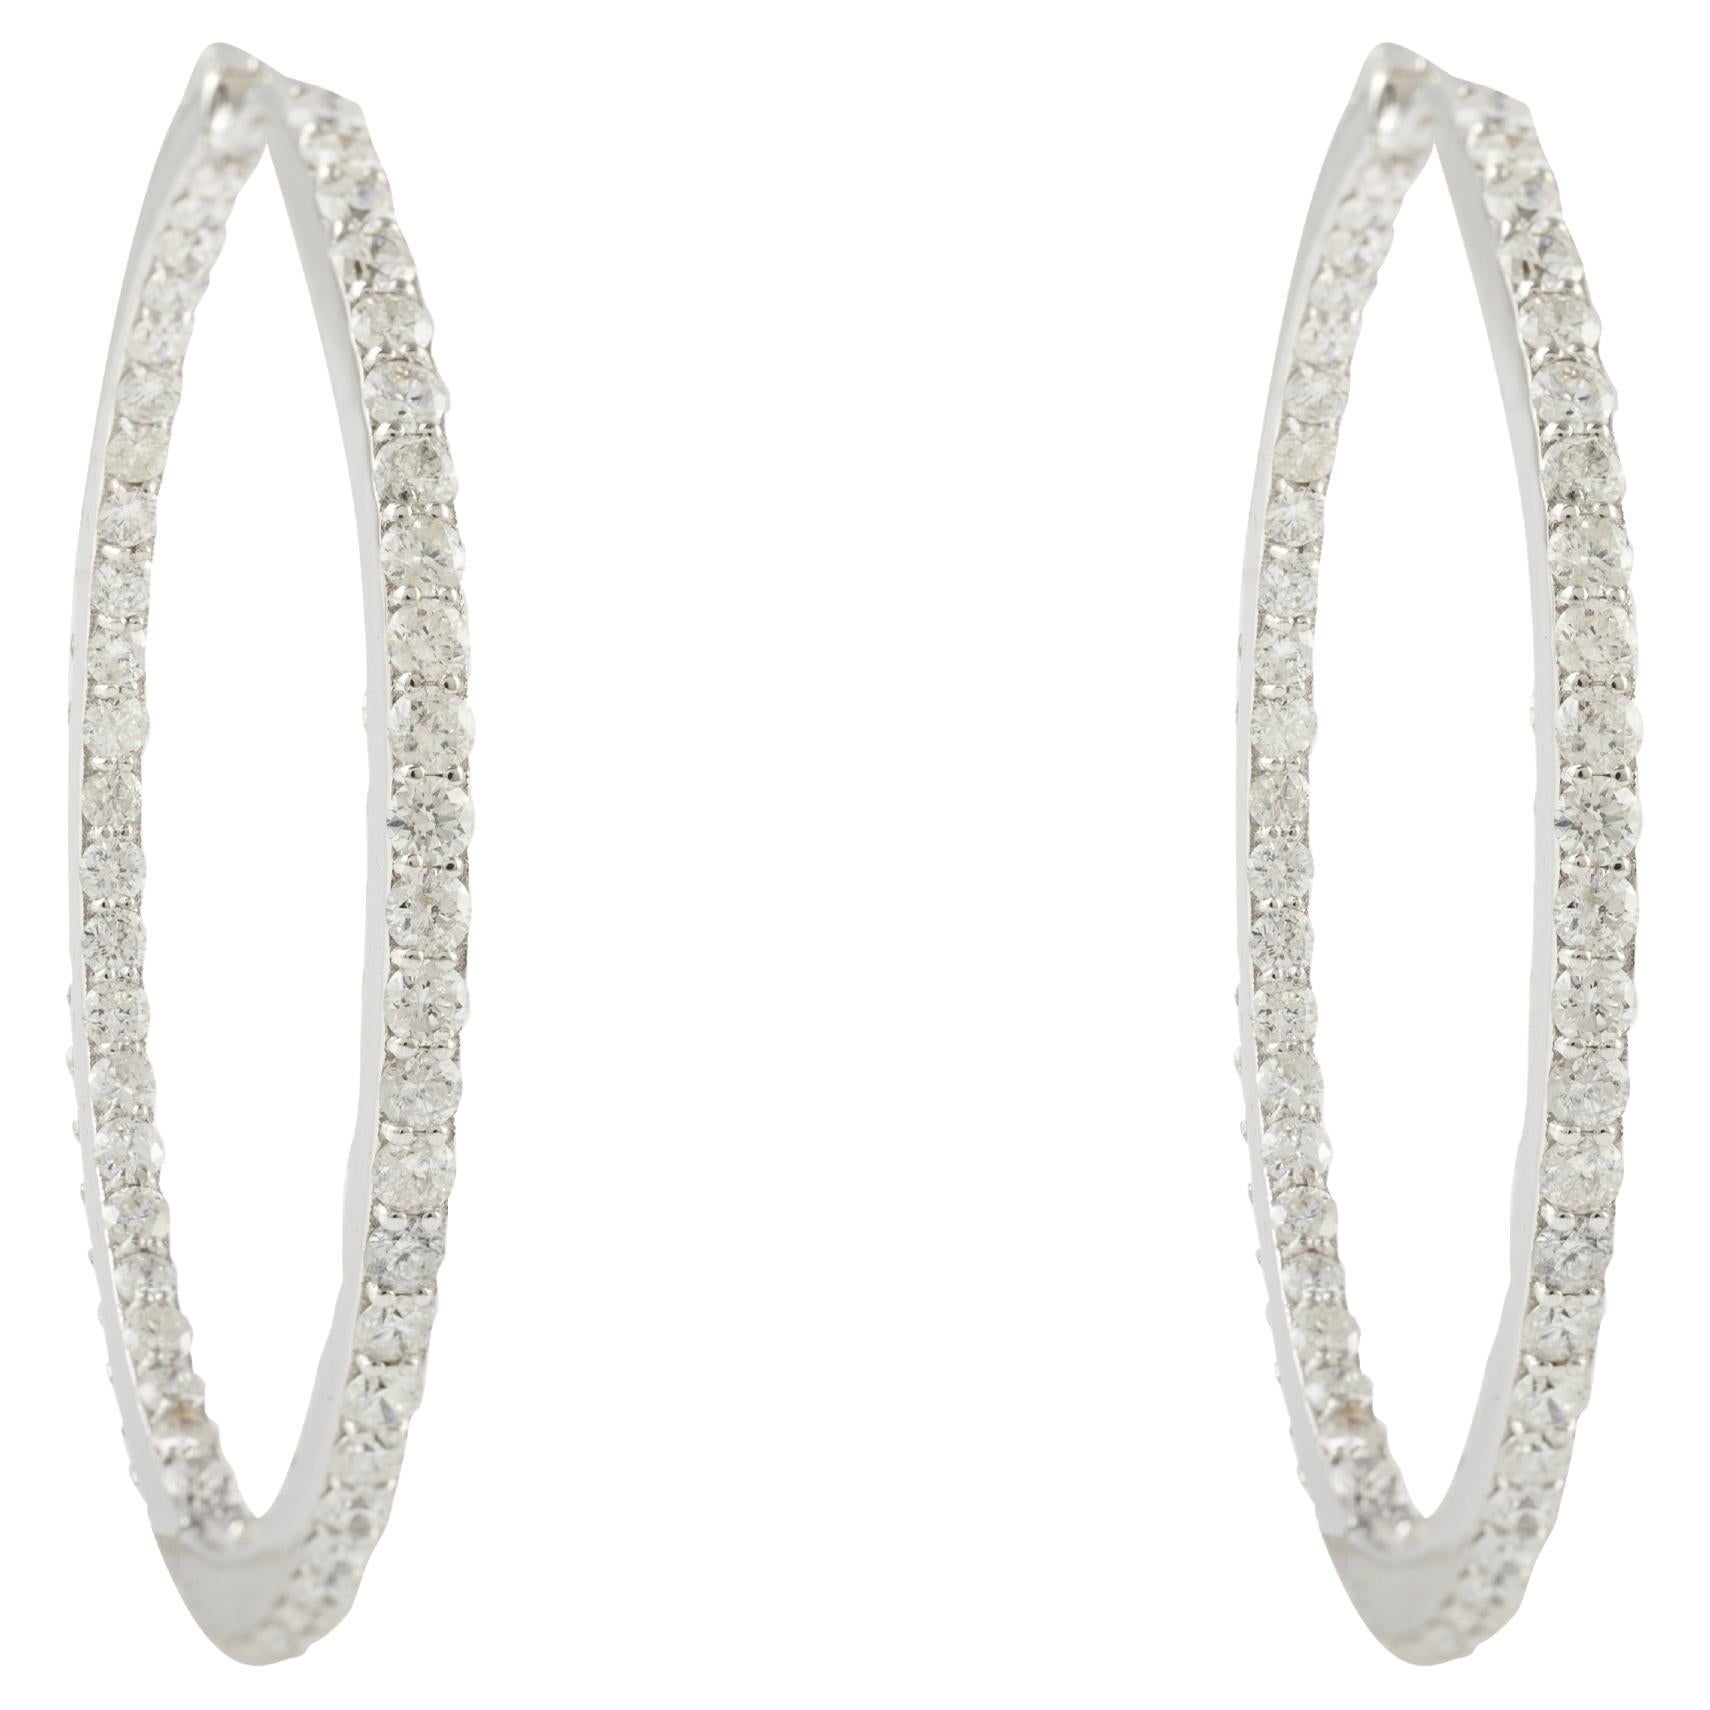 18k Solid White Gold 4.54 ctw Diamond Hoops For Her, Fine Jewelry For Sale